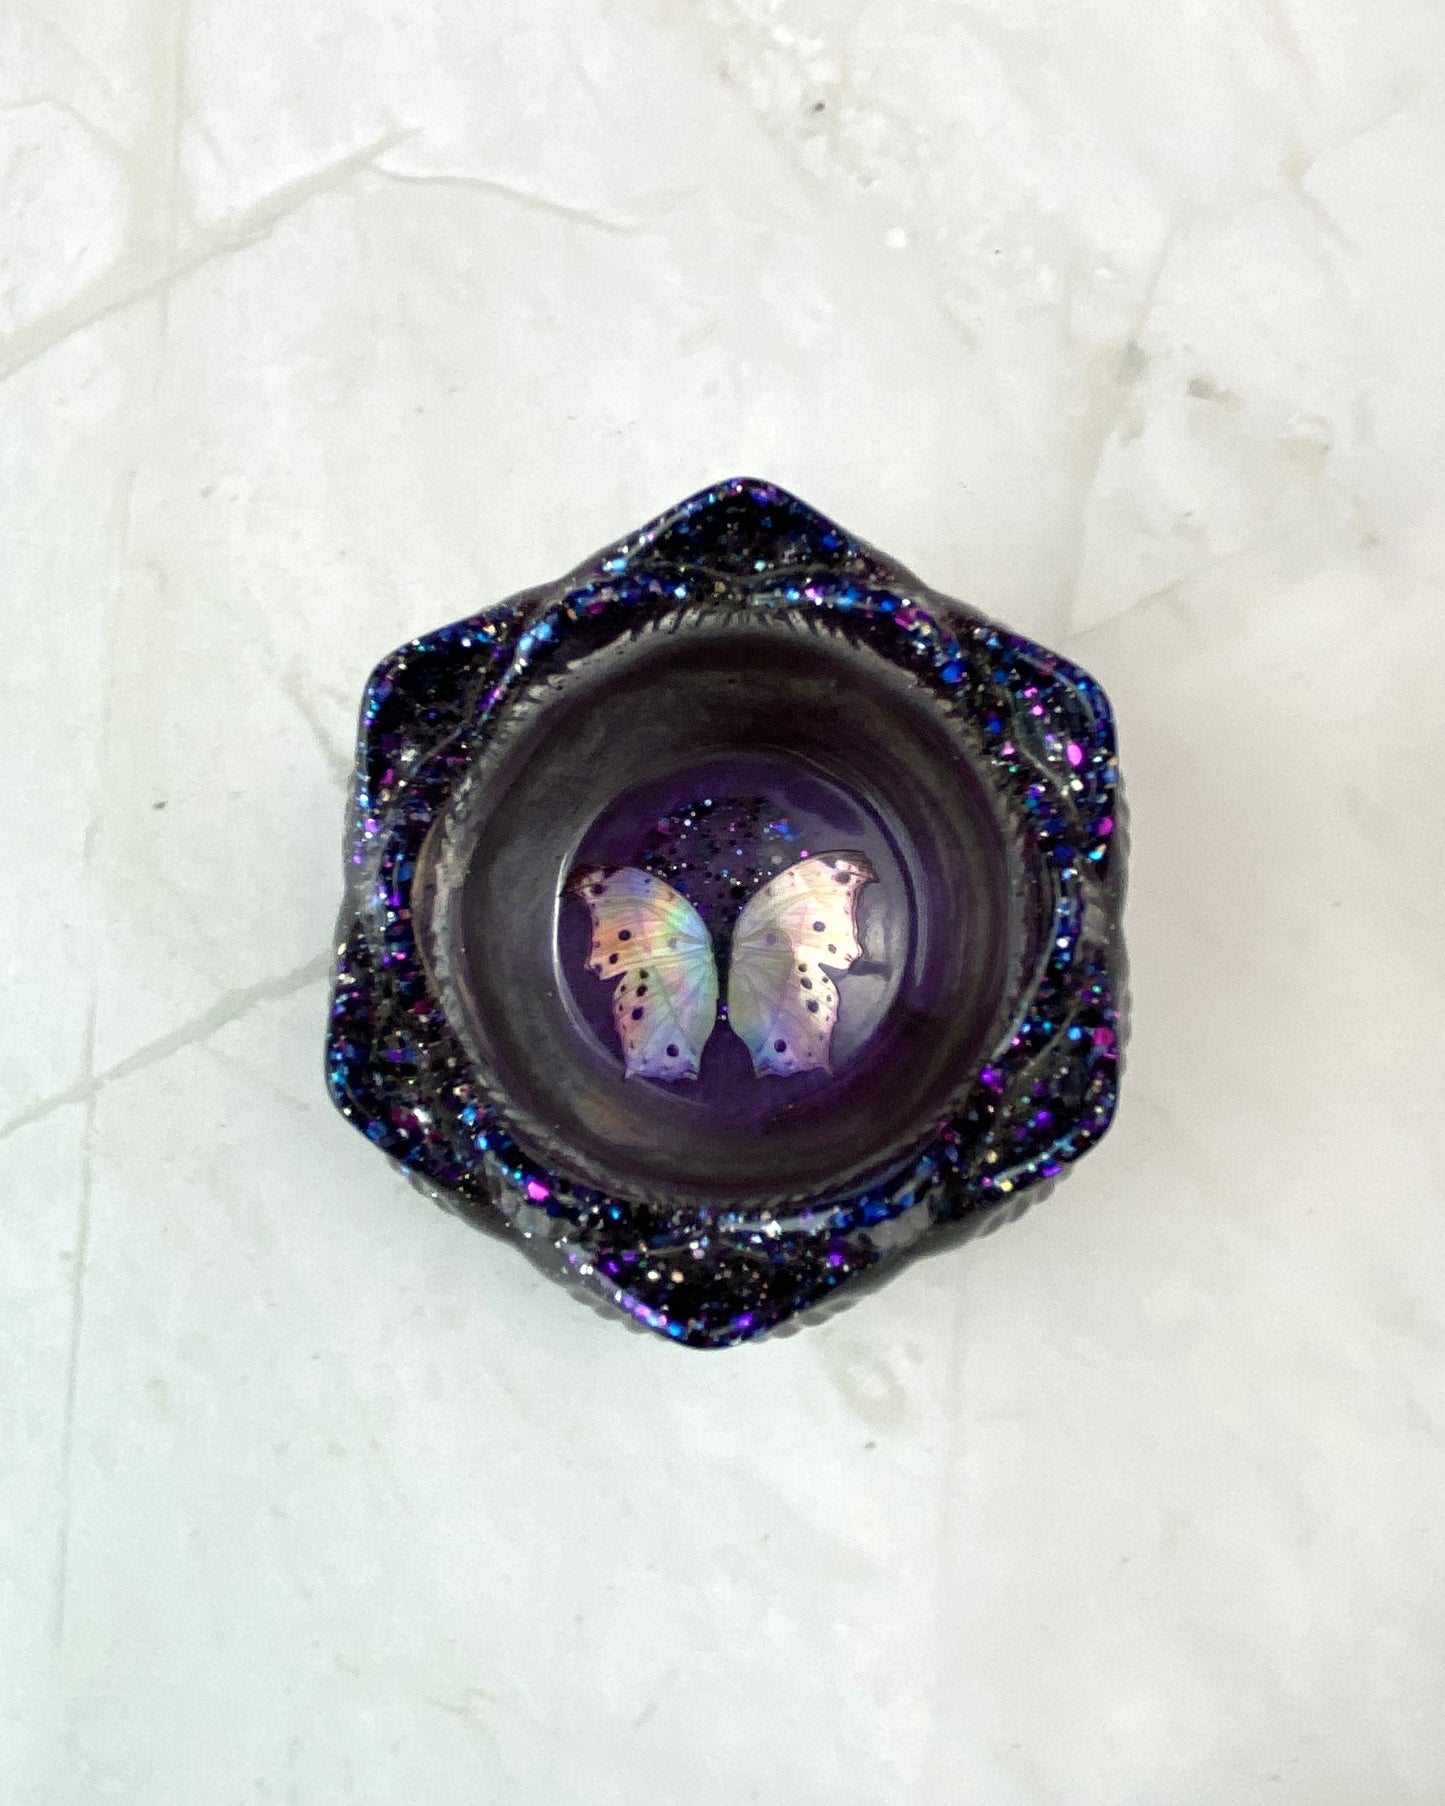 Purple Pearl & Black Glitter Butterfly Lotus Candle Holder | Handmade Home Decor